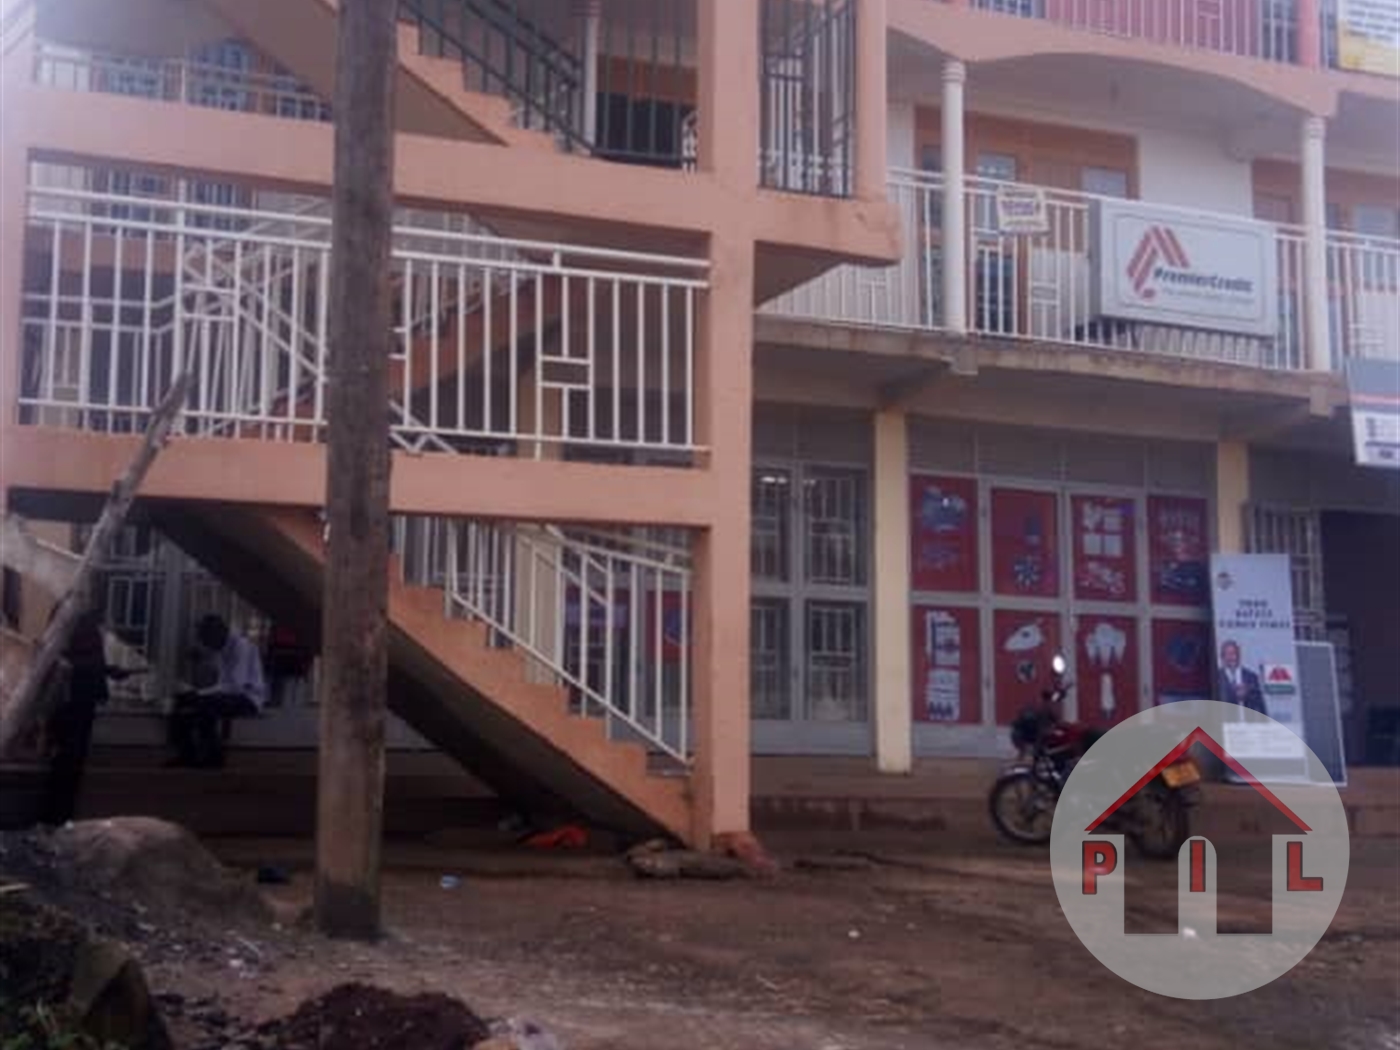 Commercial block for sale in Kawempe Kampala